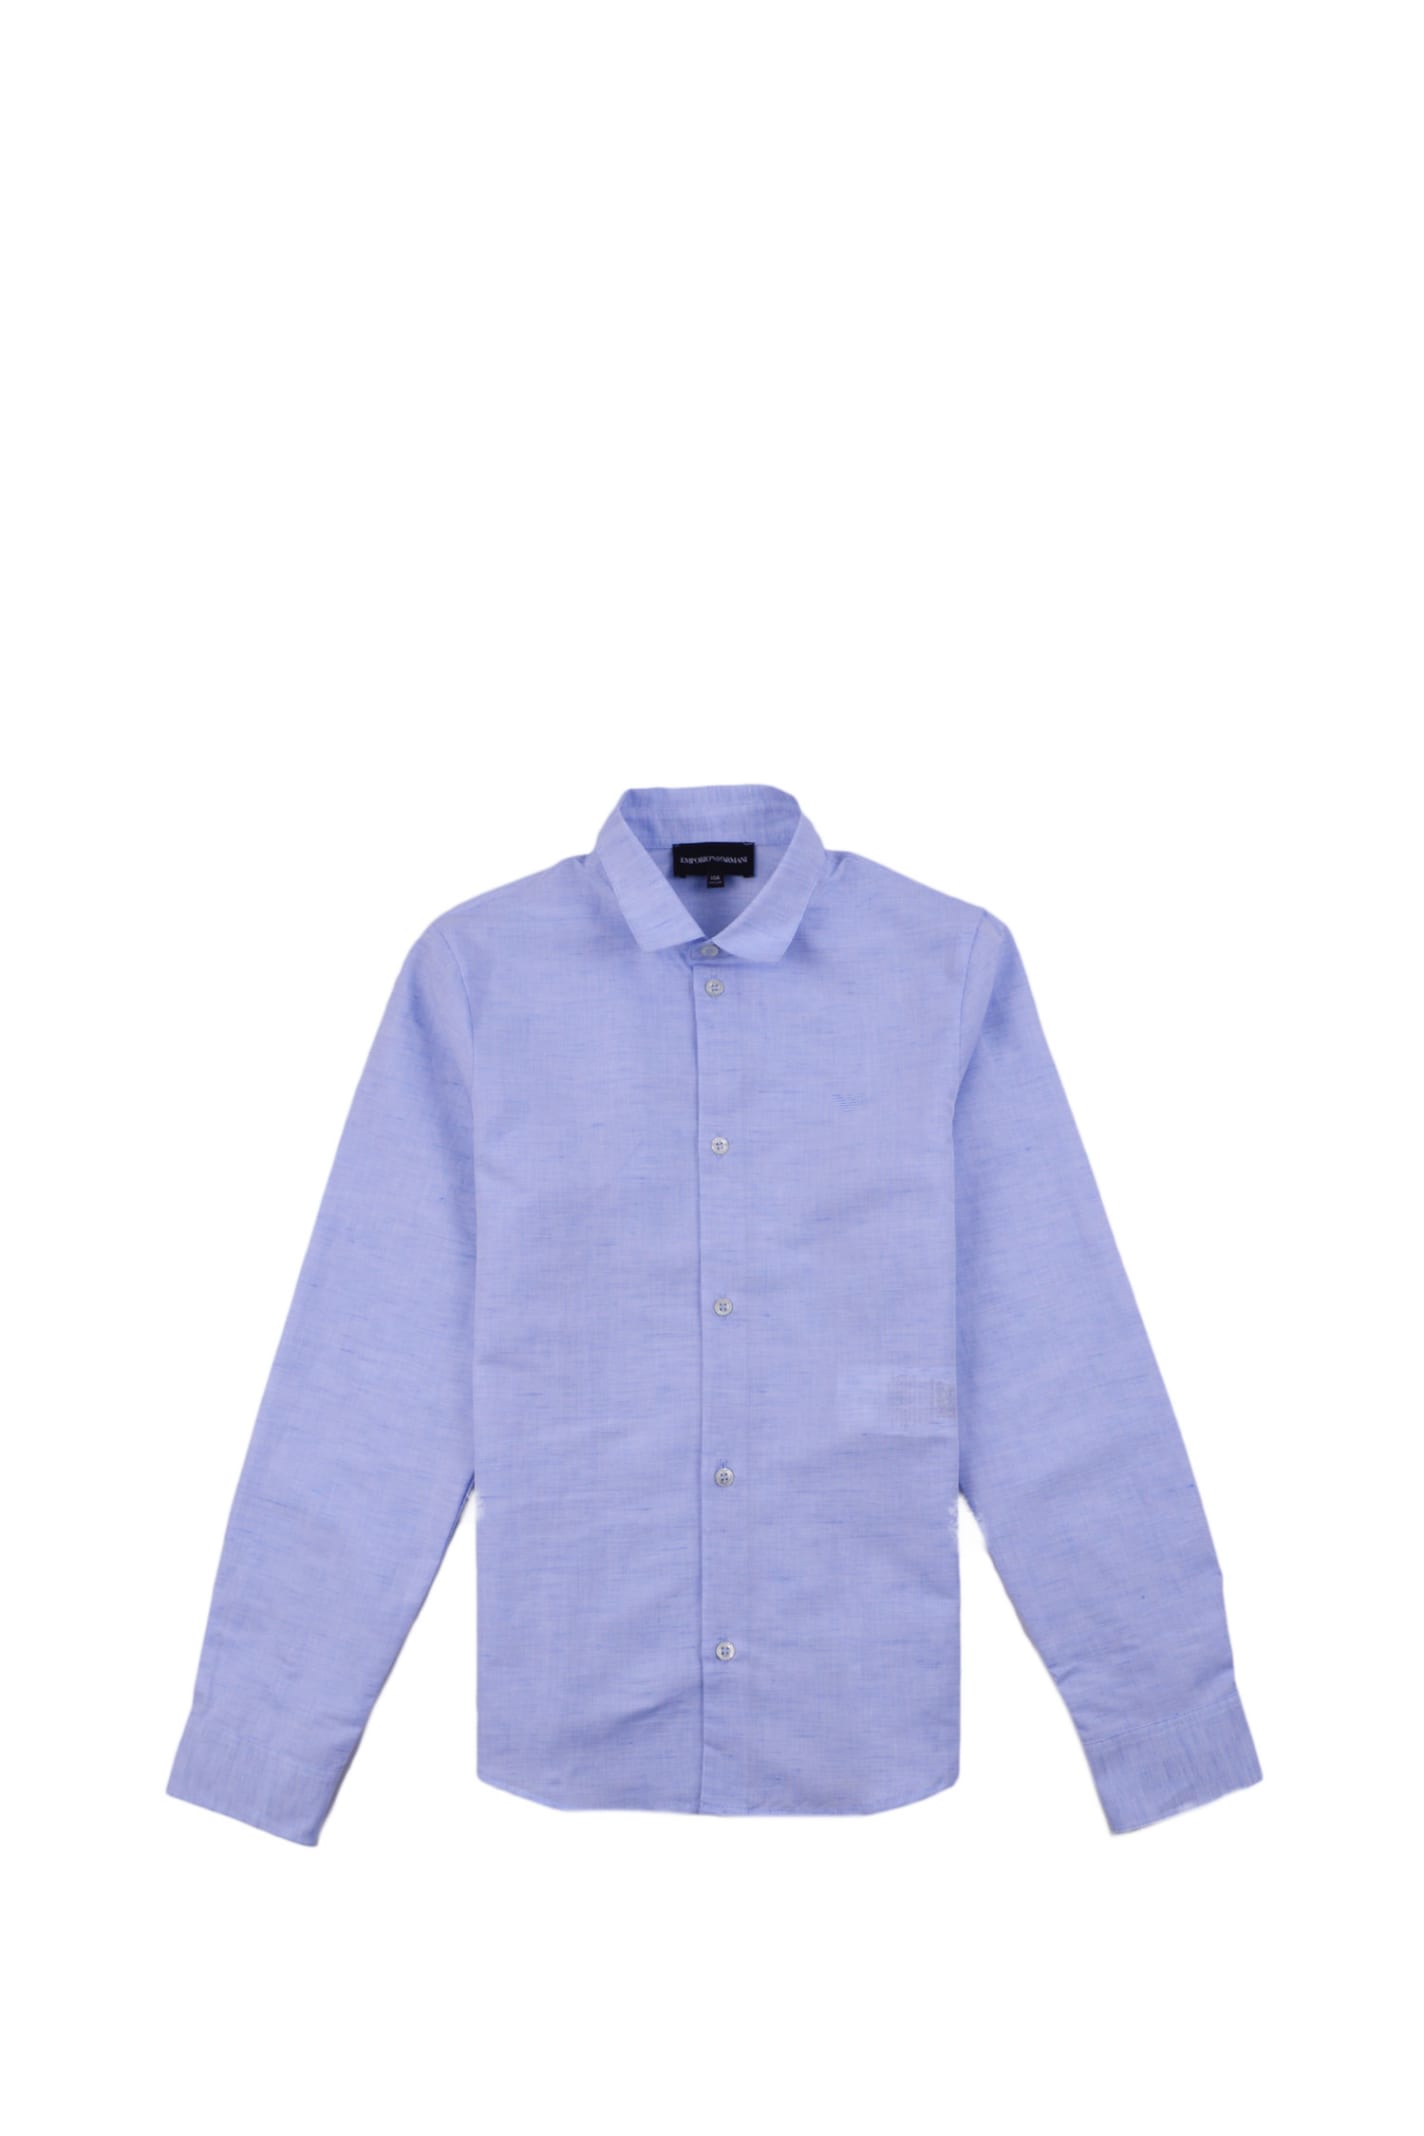 Emporio Armani Kids' Shirt In Cotton And Linen Blend In Light Blue